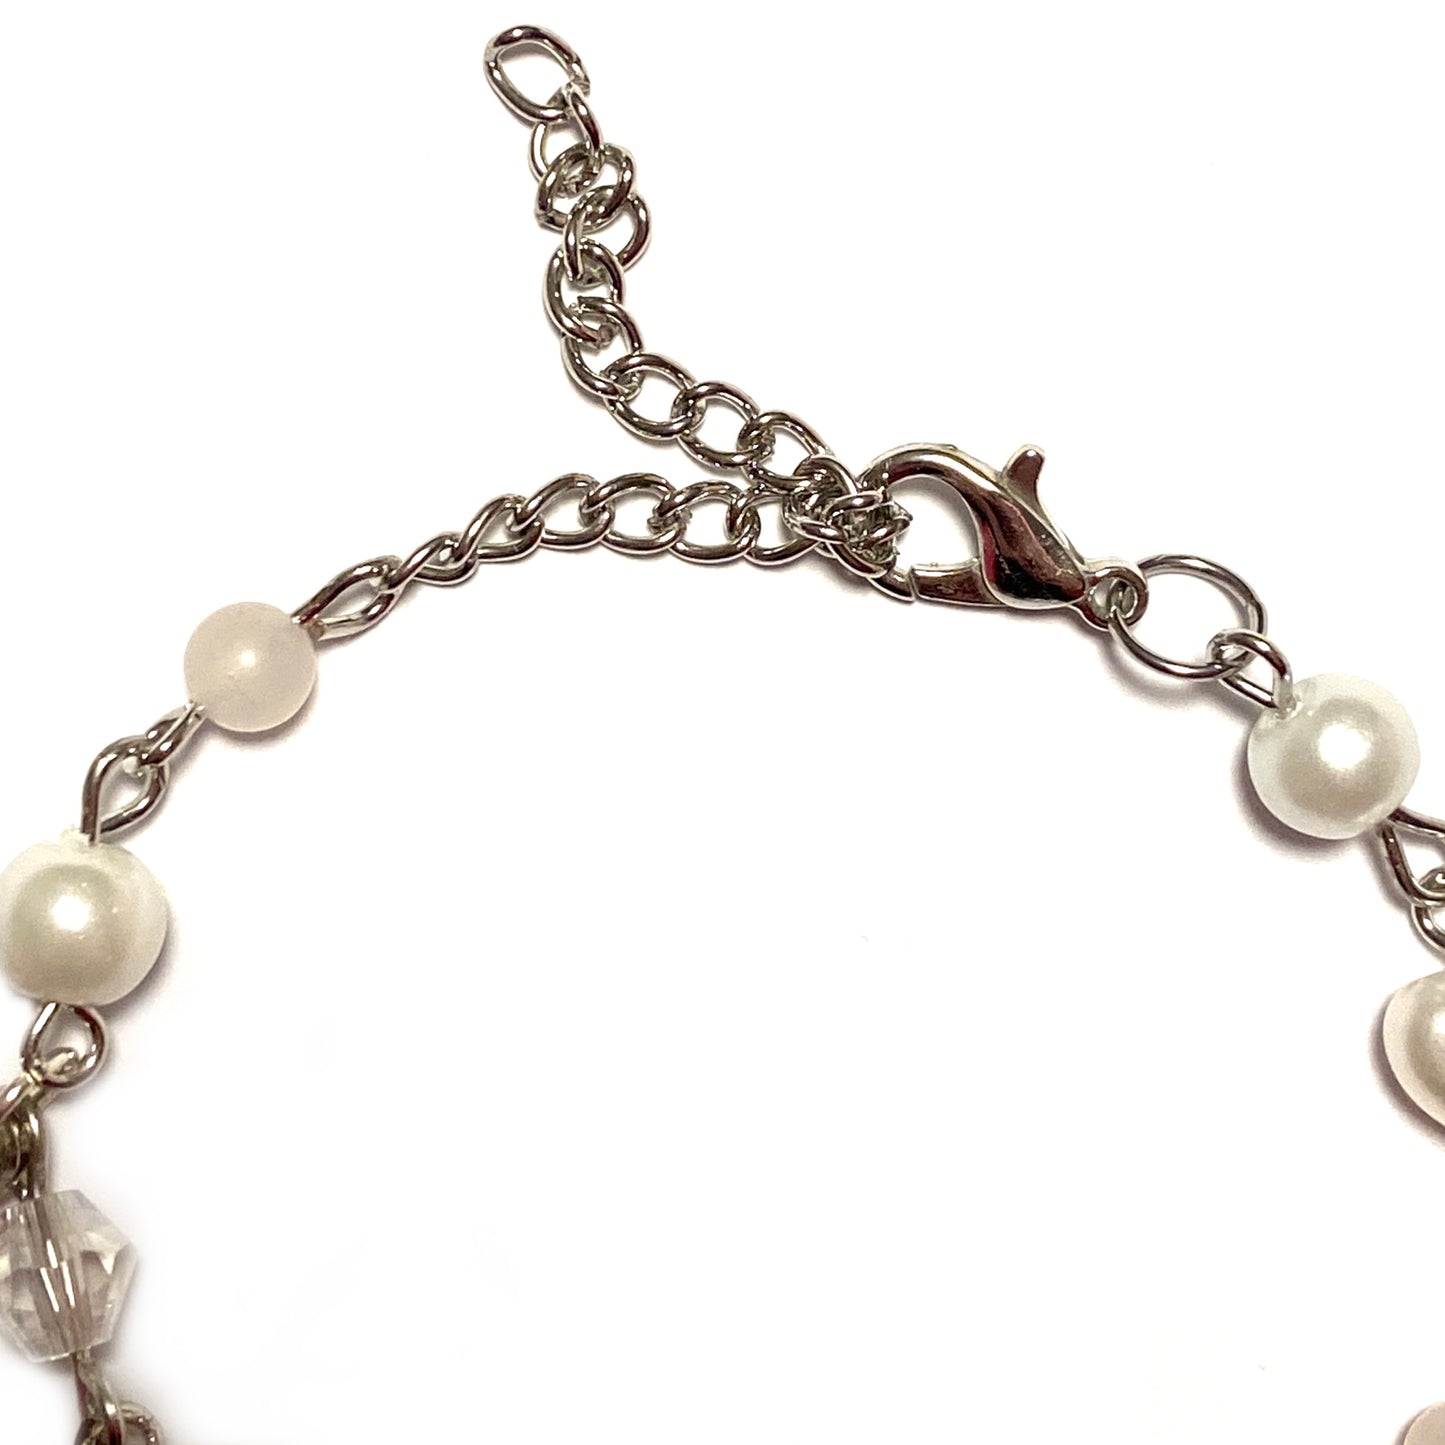 Bracelet with Rose quartz, Charms and Beads